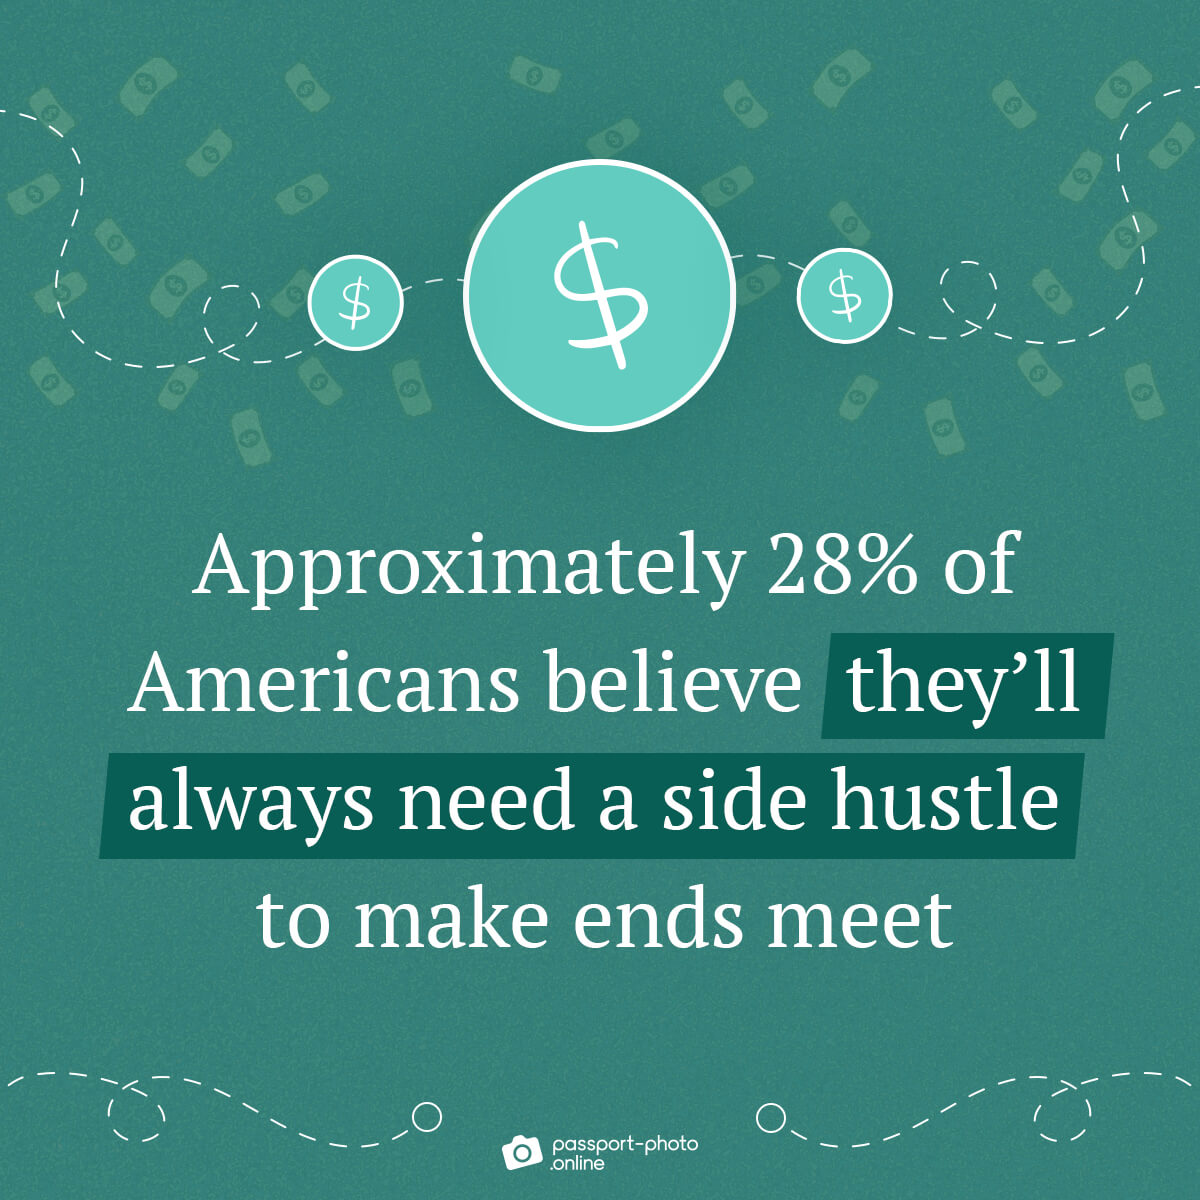 ~28% of Americans believe they’ll always need a side hustle to make ends meet